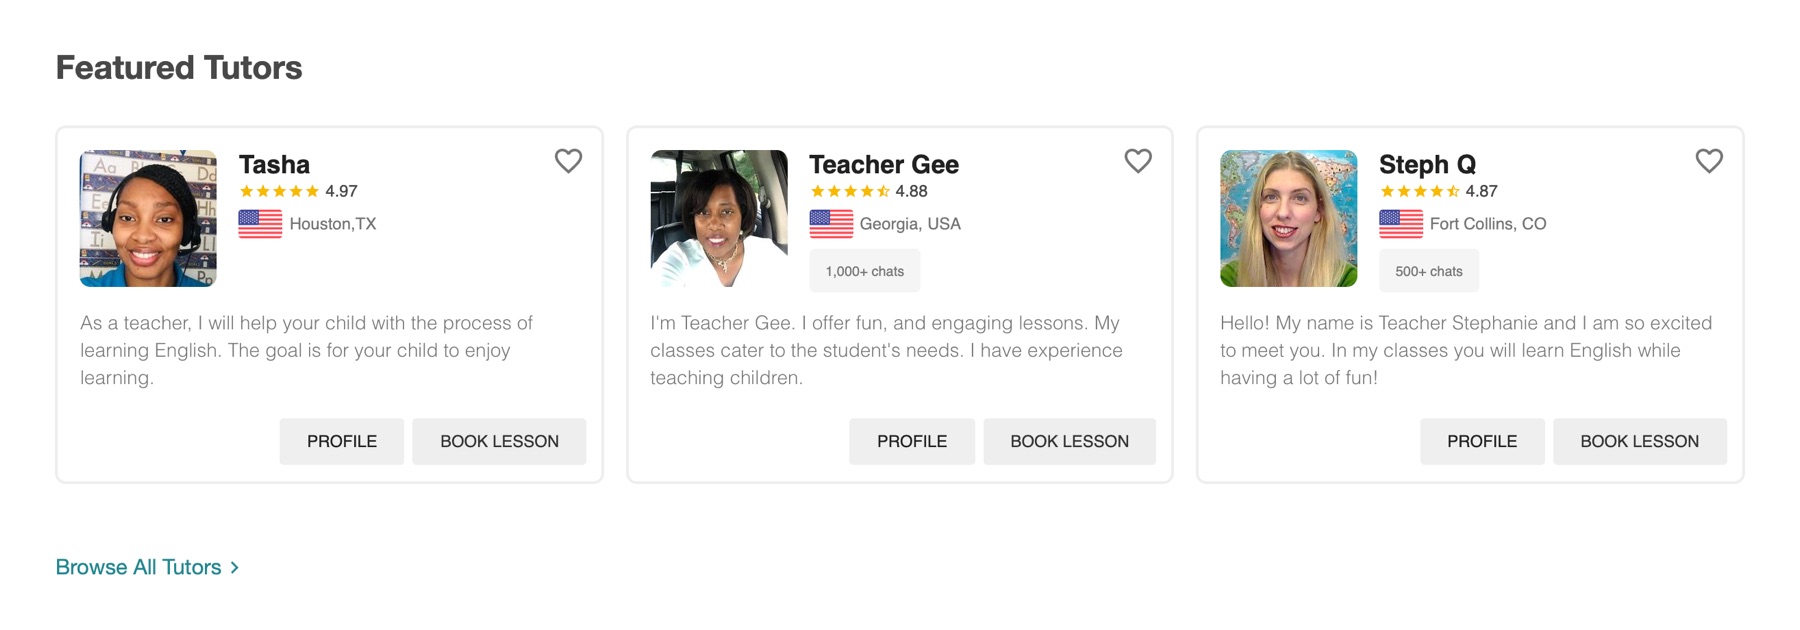 An example of featured tutors, showing their name, rating, location, and description